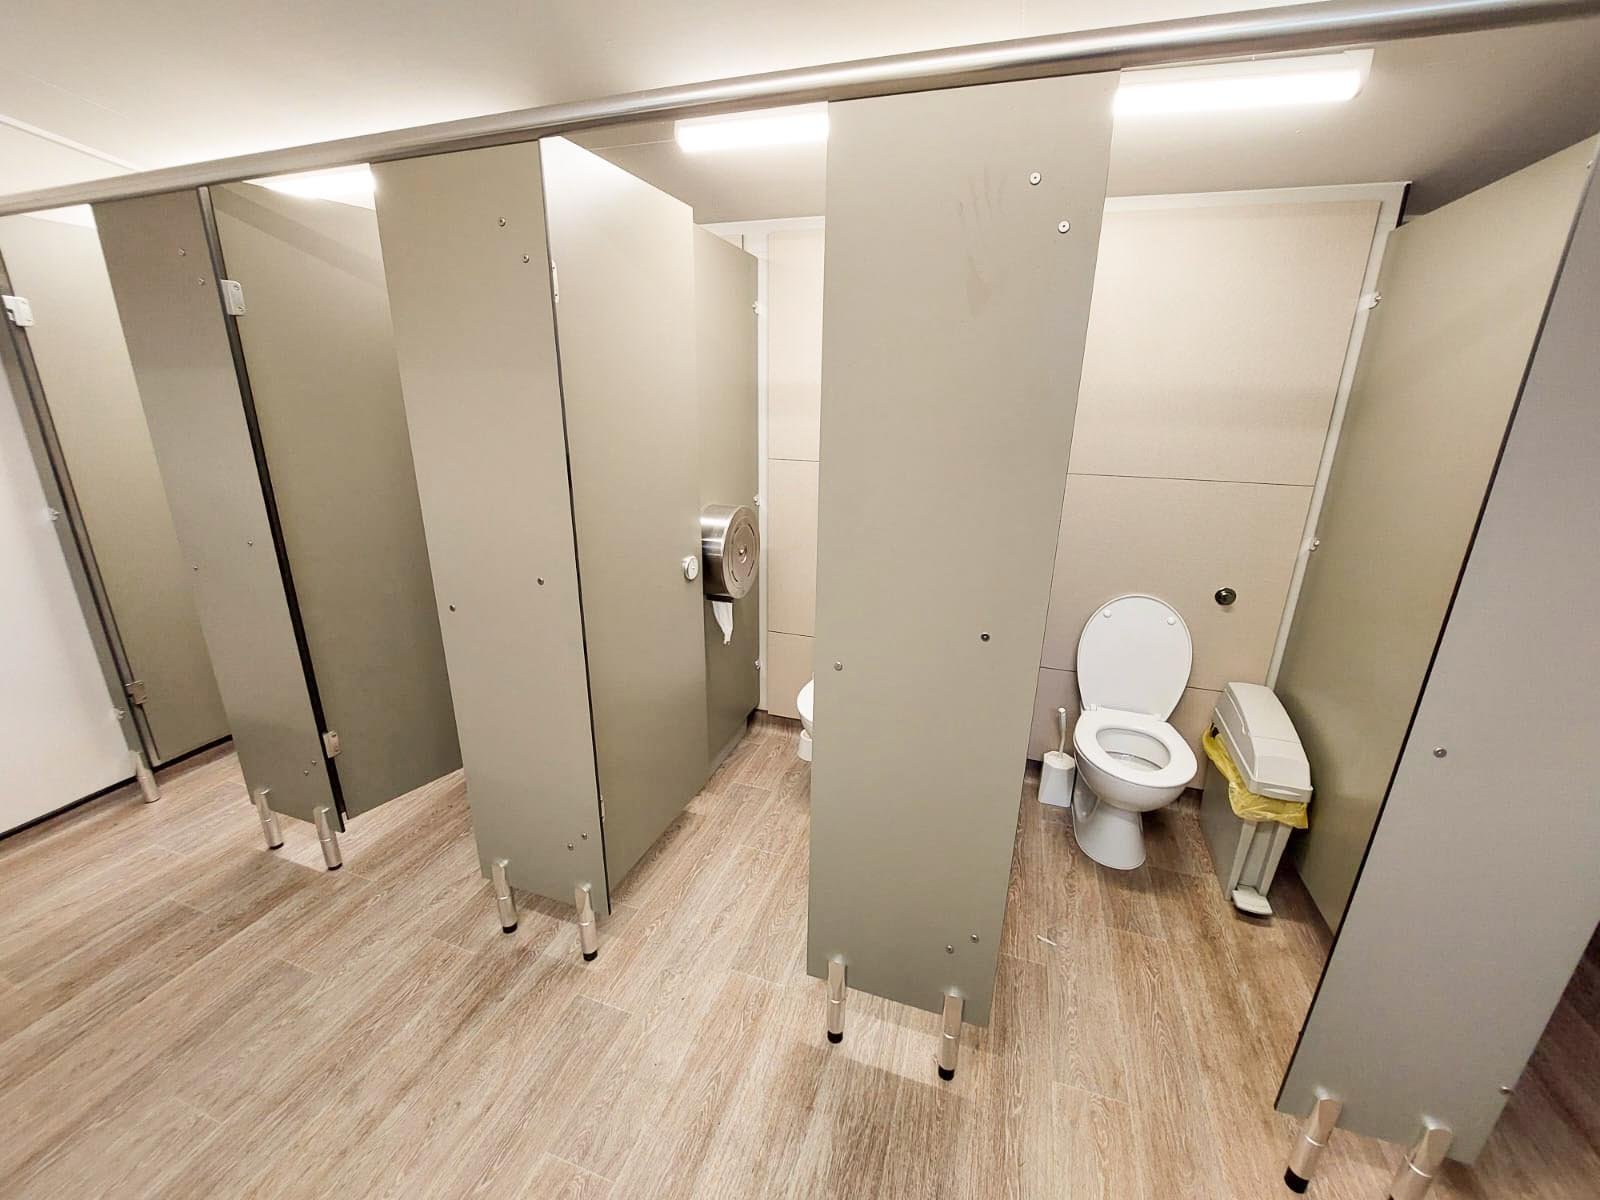 row of toilet cubicles with full height duct panels in a bespoke green colour with a woodgrain vinyl floor at howletts zoo.jpg